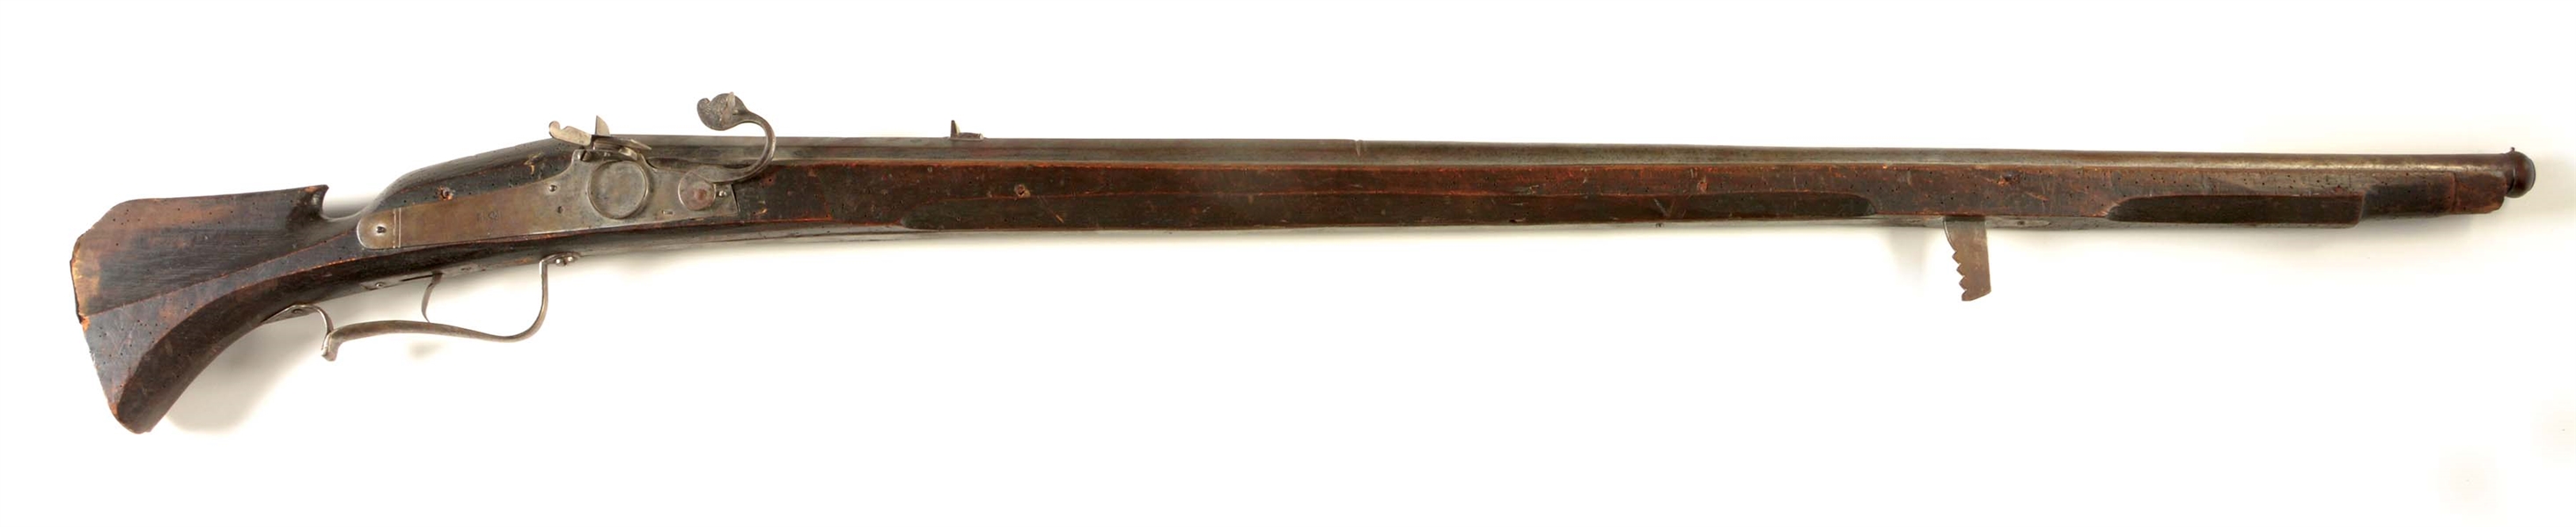 (A) A CLASSIC LATE 16TH CENTURY GERMAN MATCHLOCK WALL GUN, BEAUTIFULLY MARKED THROUGHOUT, POSSIBLY SUHL WITH DESIRABLE FISHTAIL BUTT.